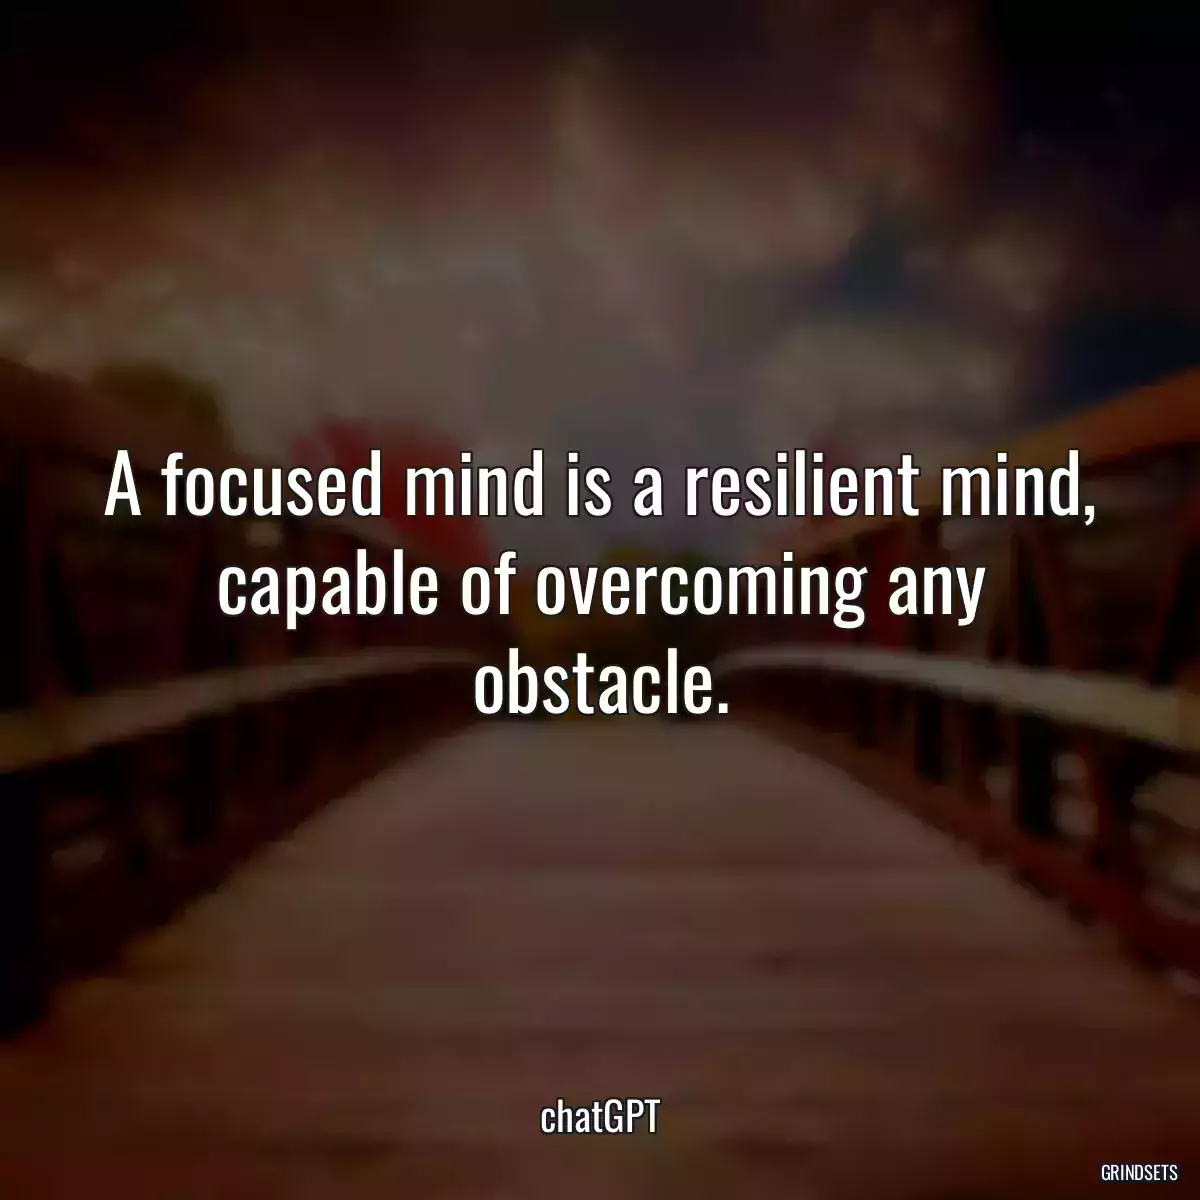 A focused mind is a resilient mind, capable of overcoming any obstacle.